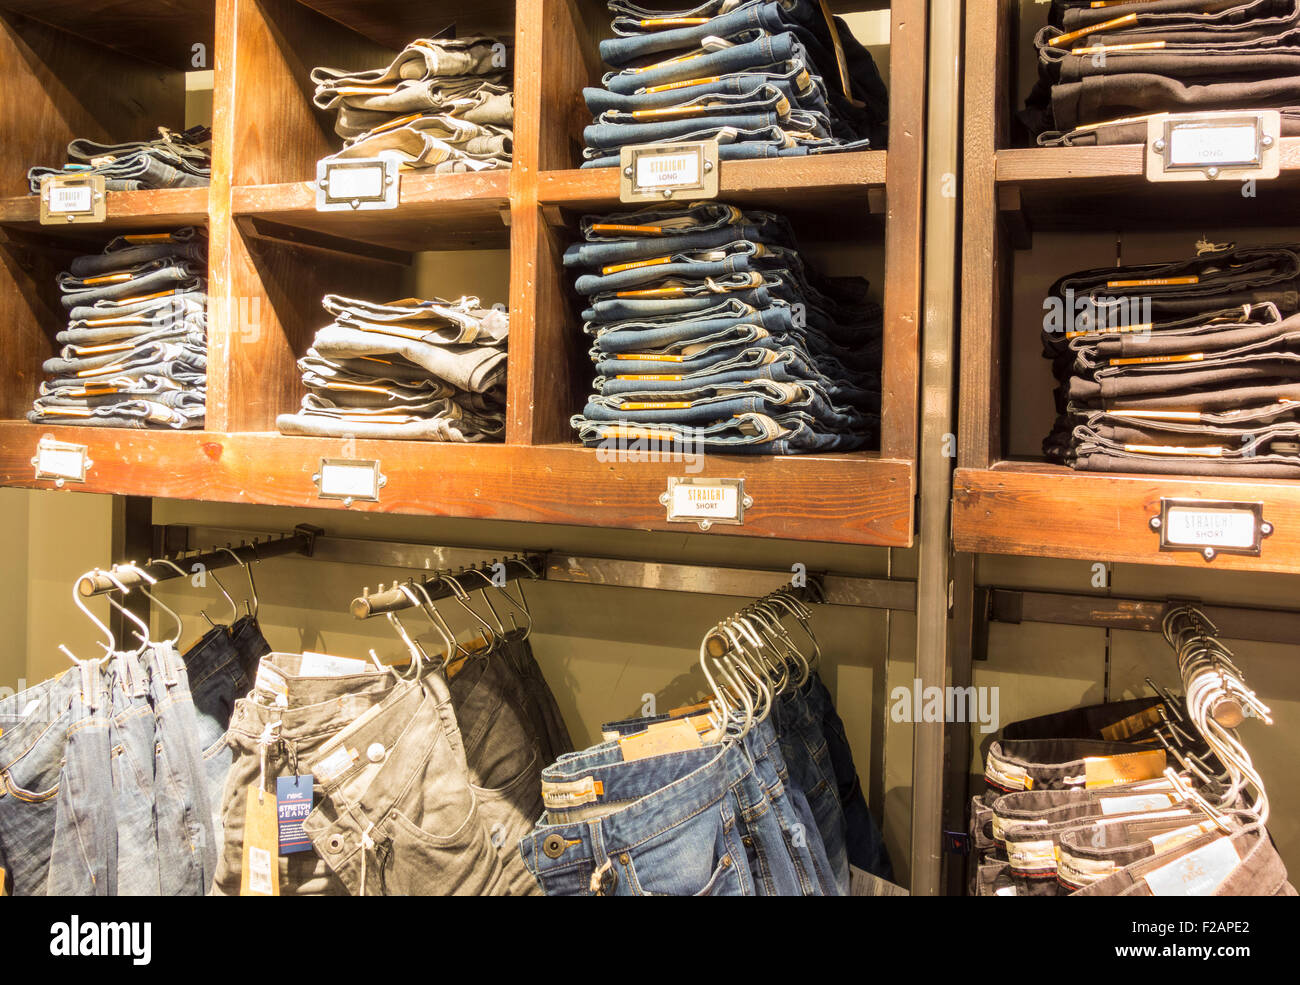 Denim Jeans display in clothing store. UK Stock Photo - Alamy